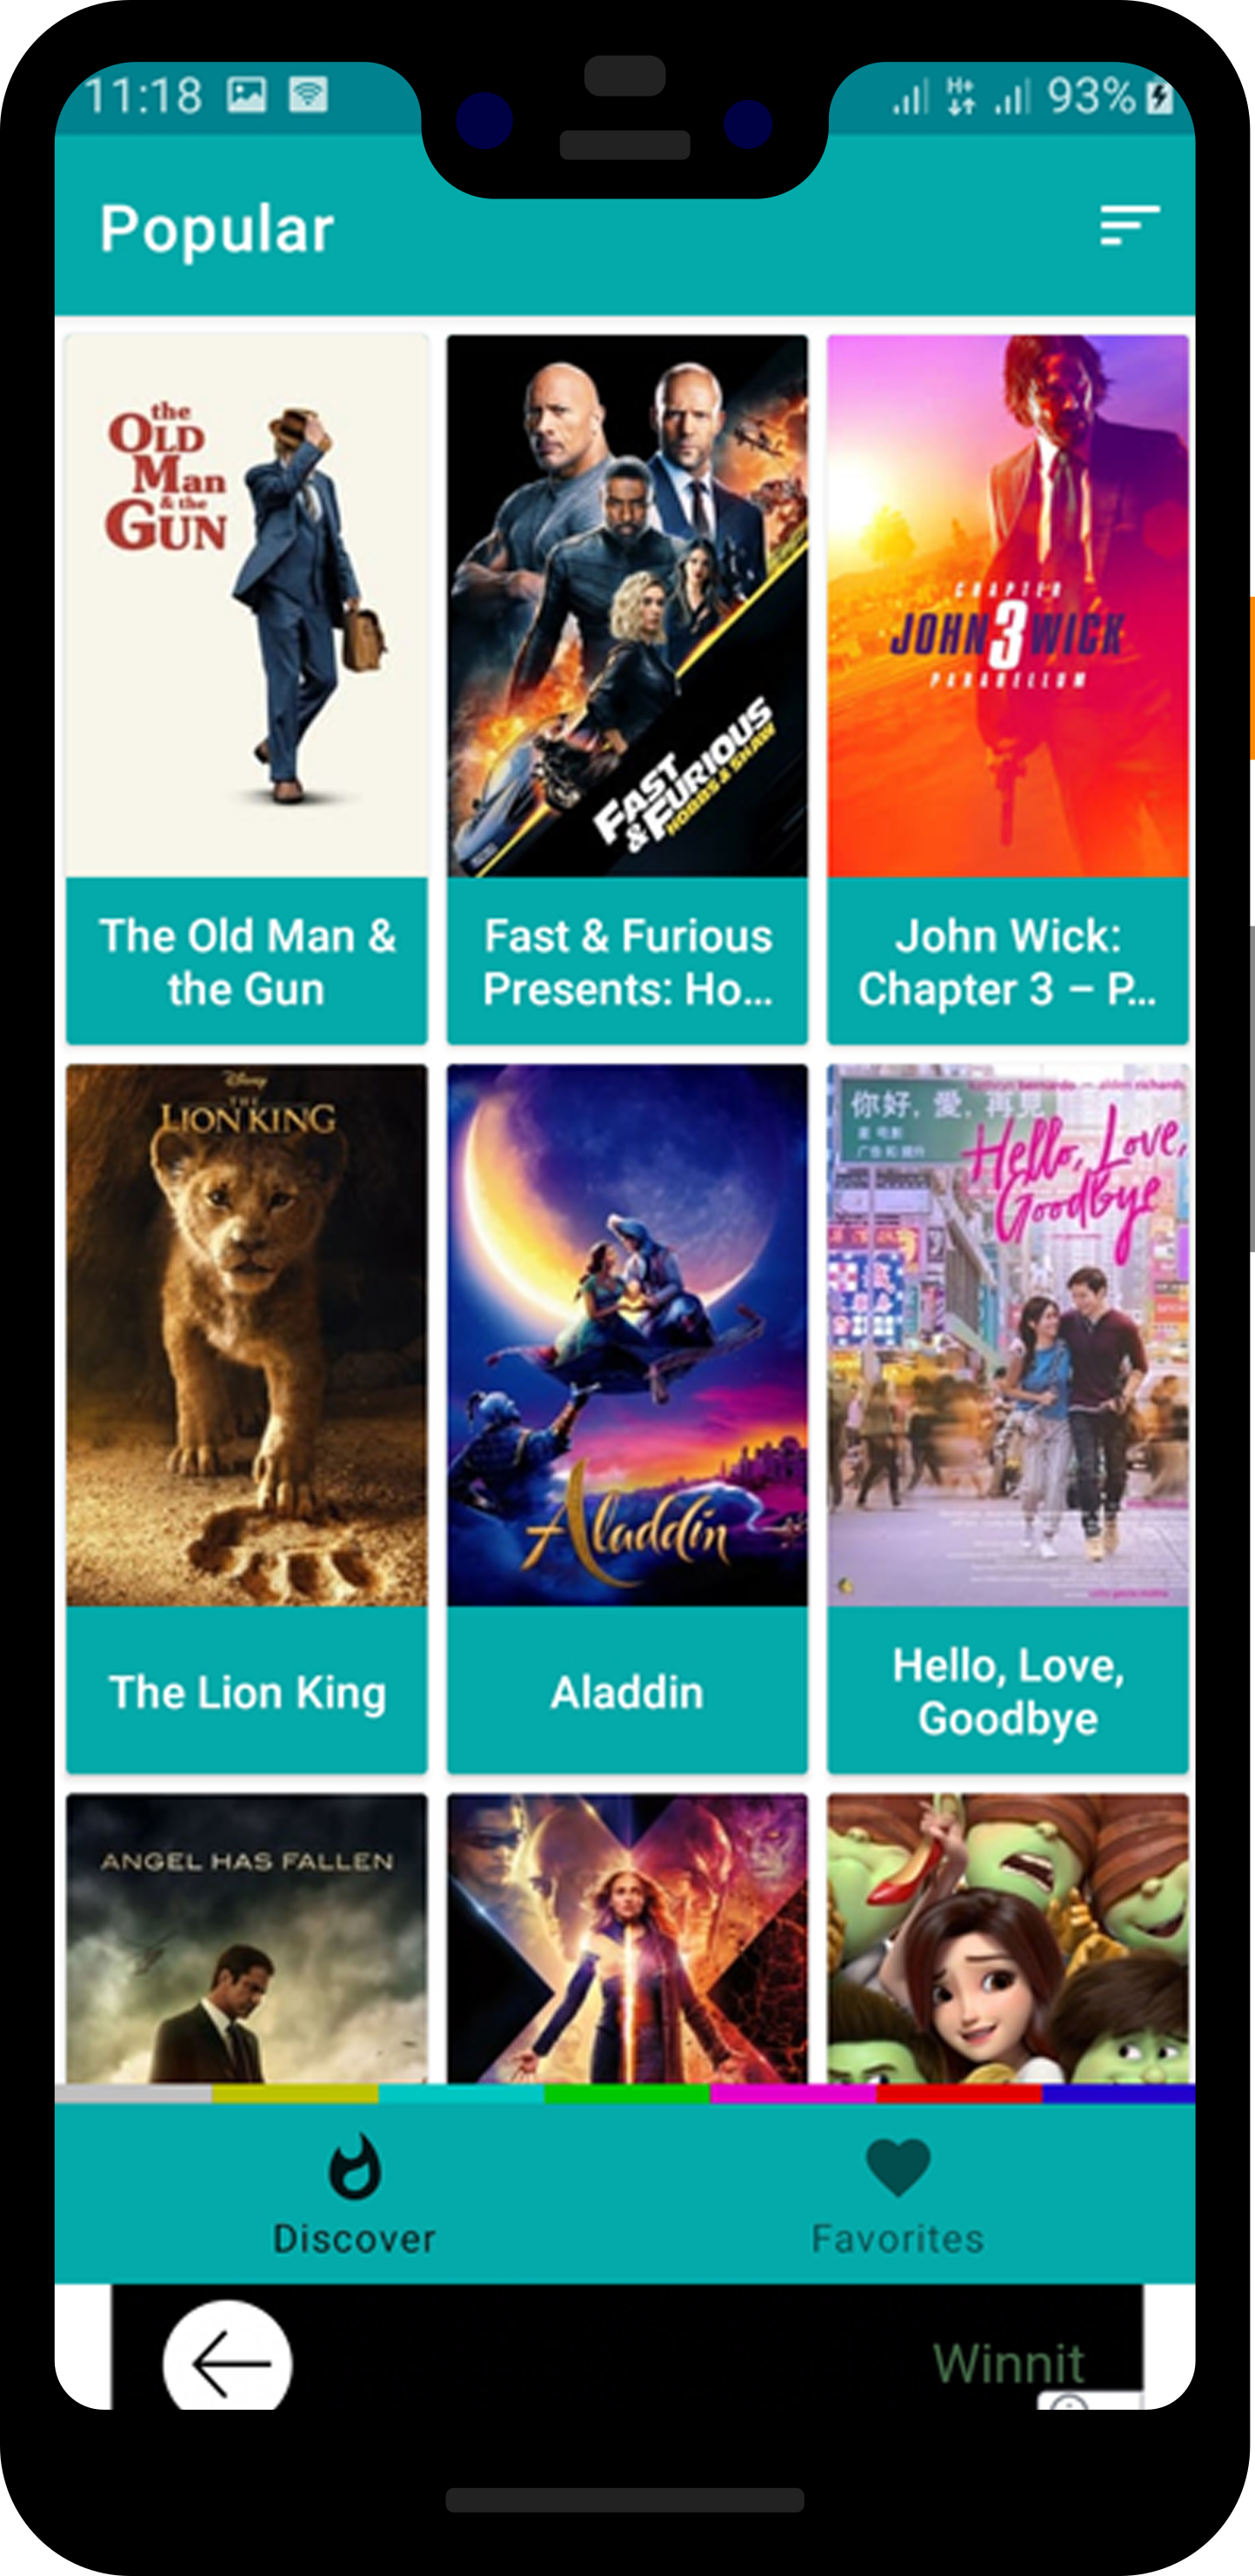 Movies Reviews -Latest and Popular Movies Reviews and Trailers by androhive